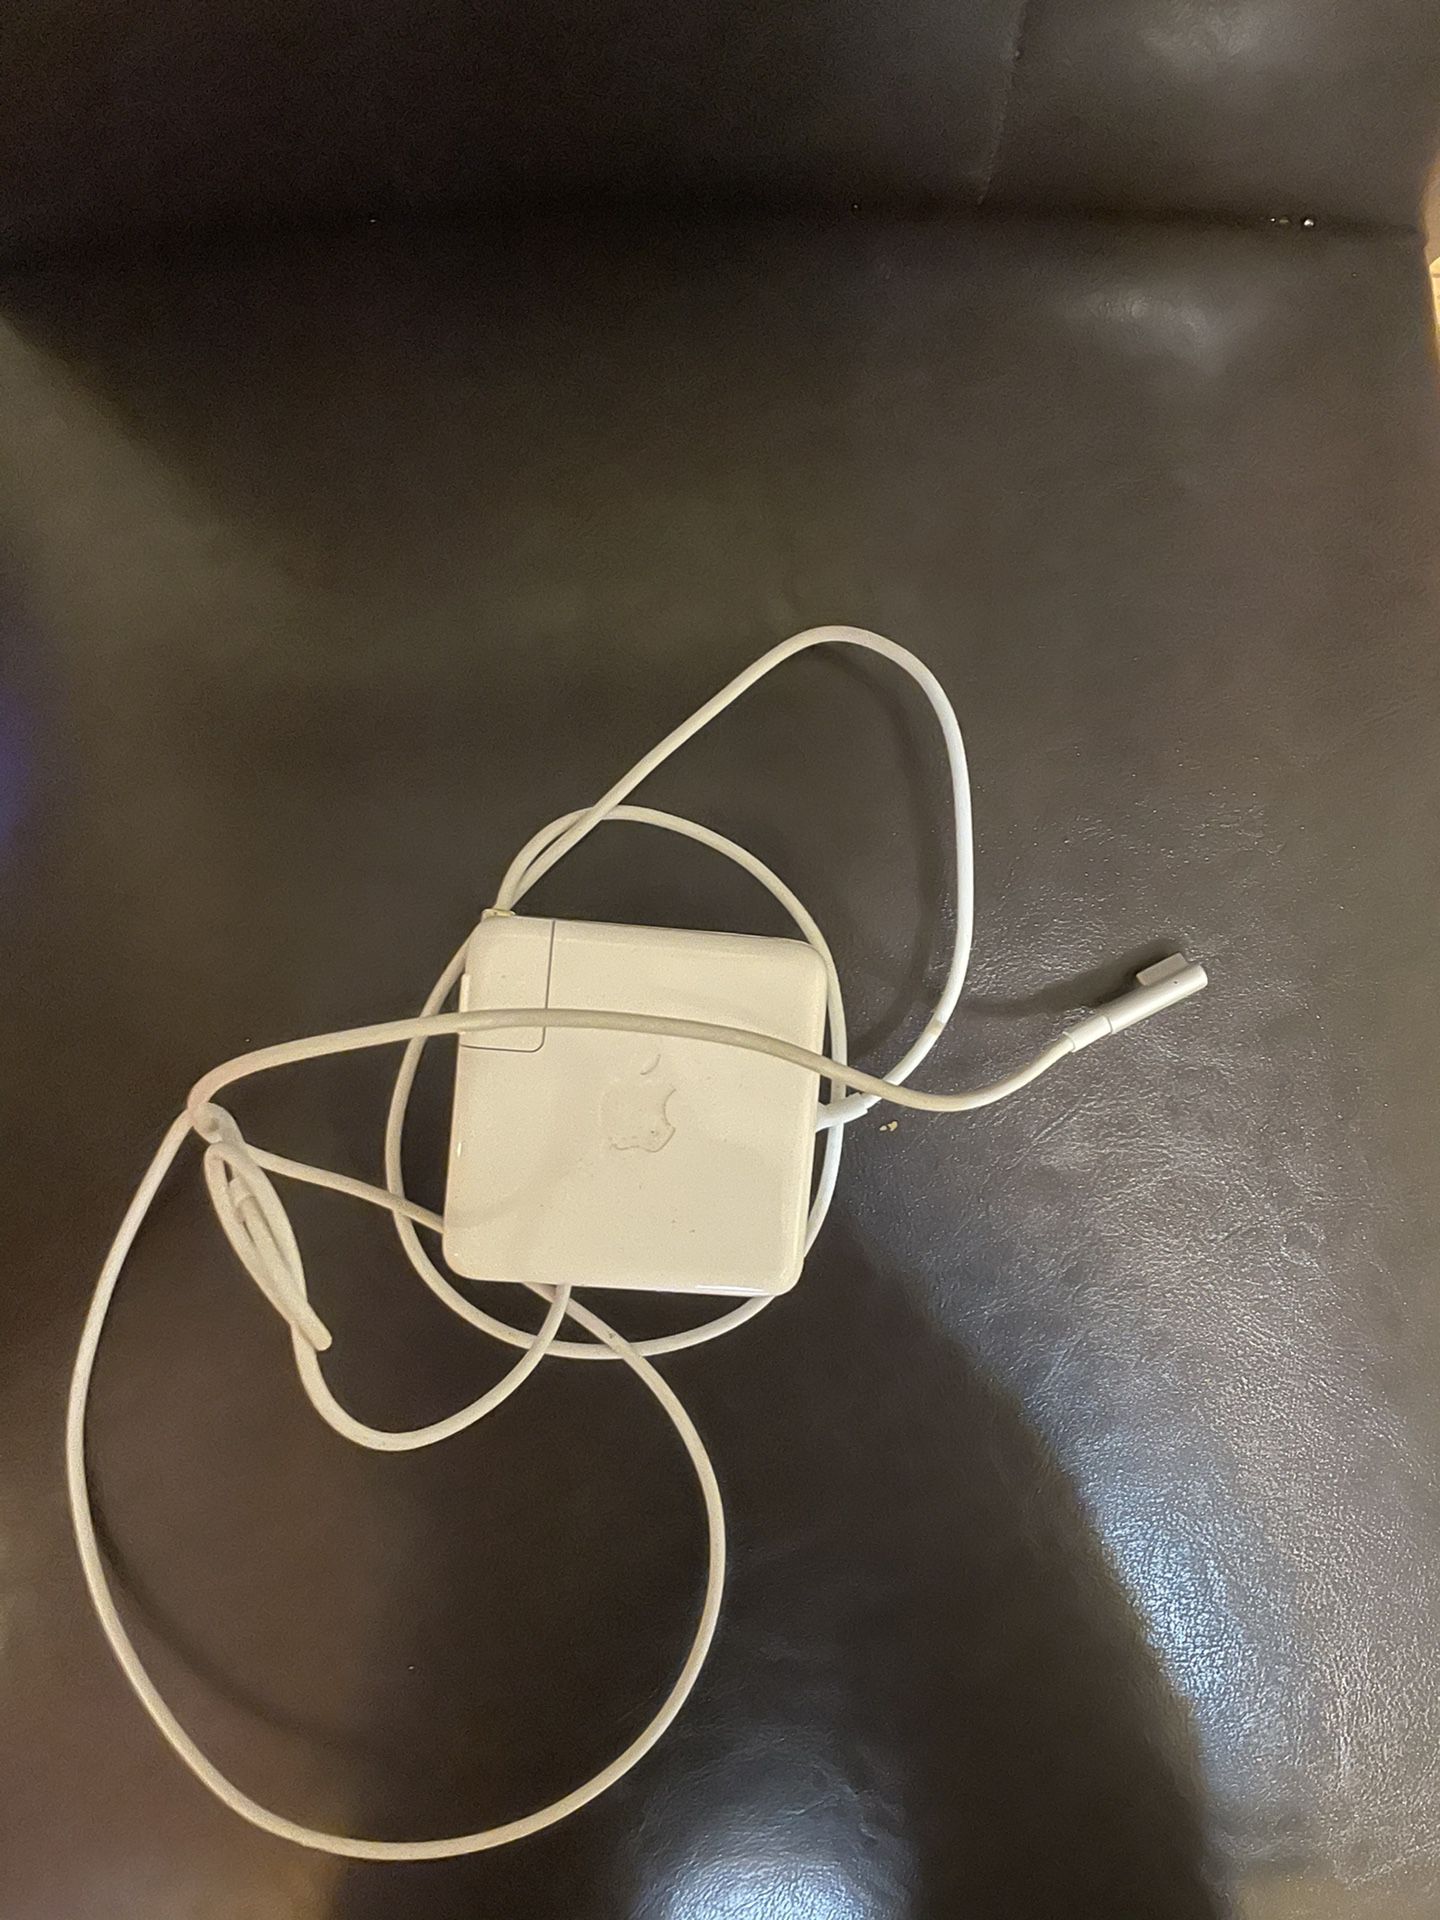 Mack book Pro Apple Charger